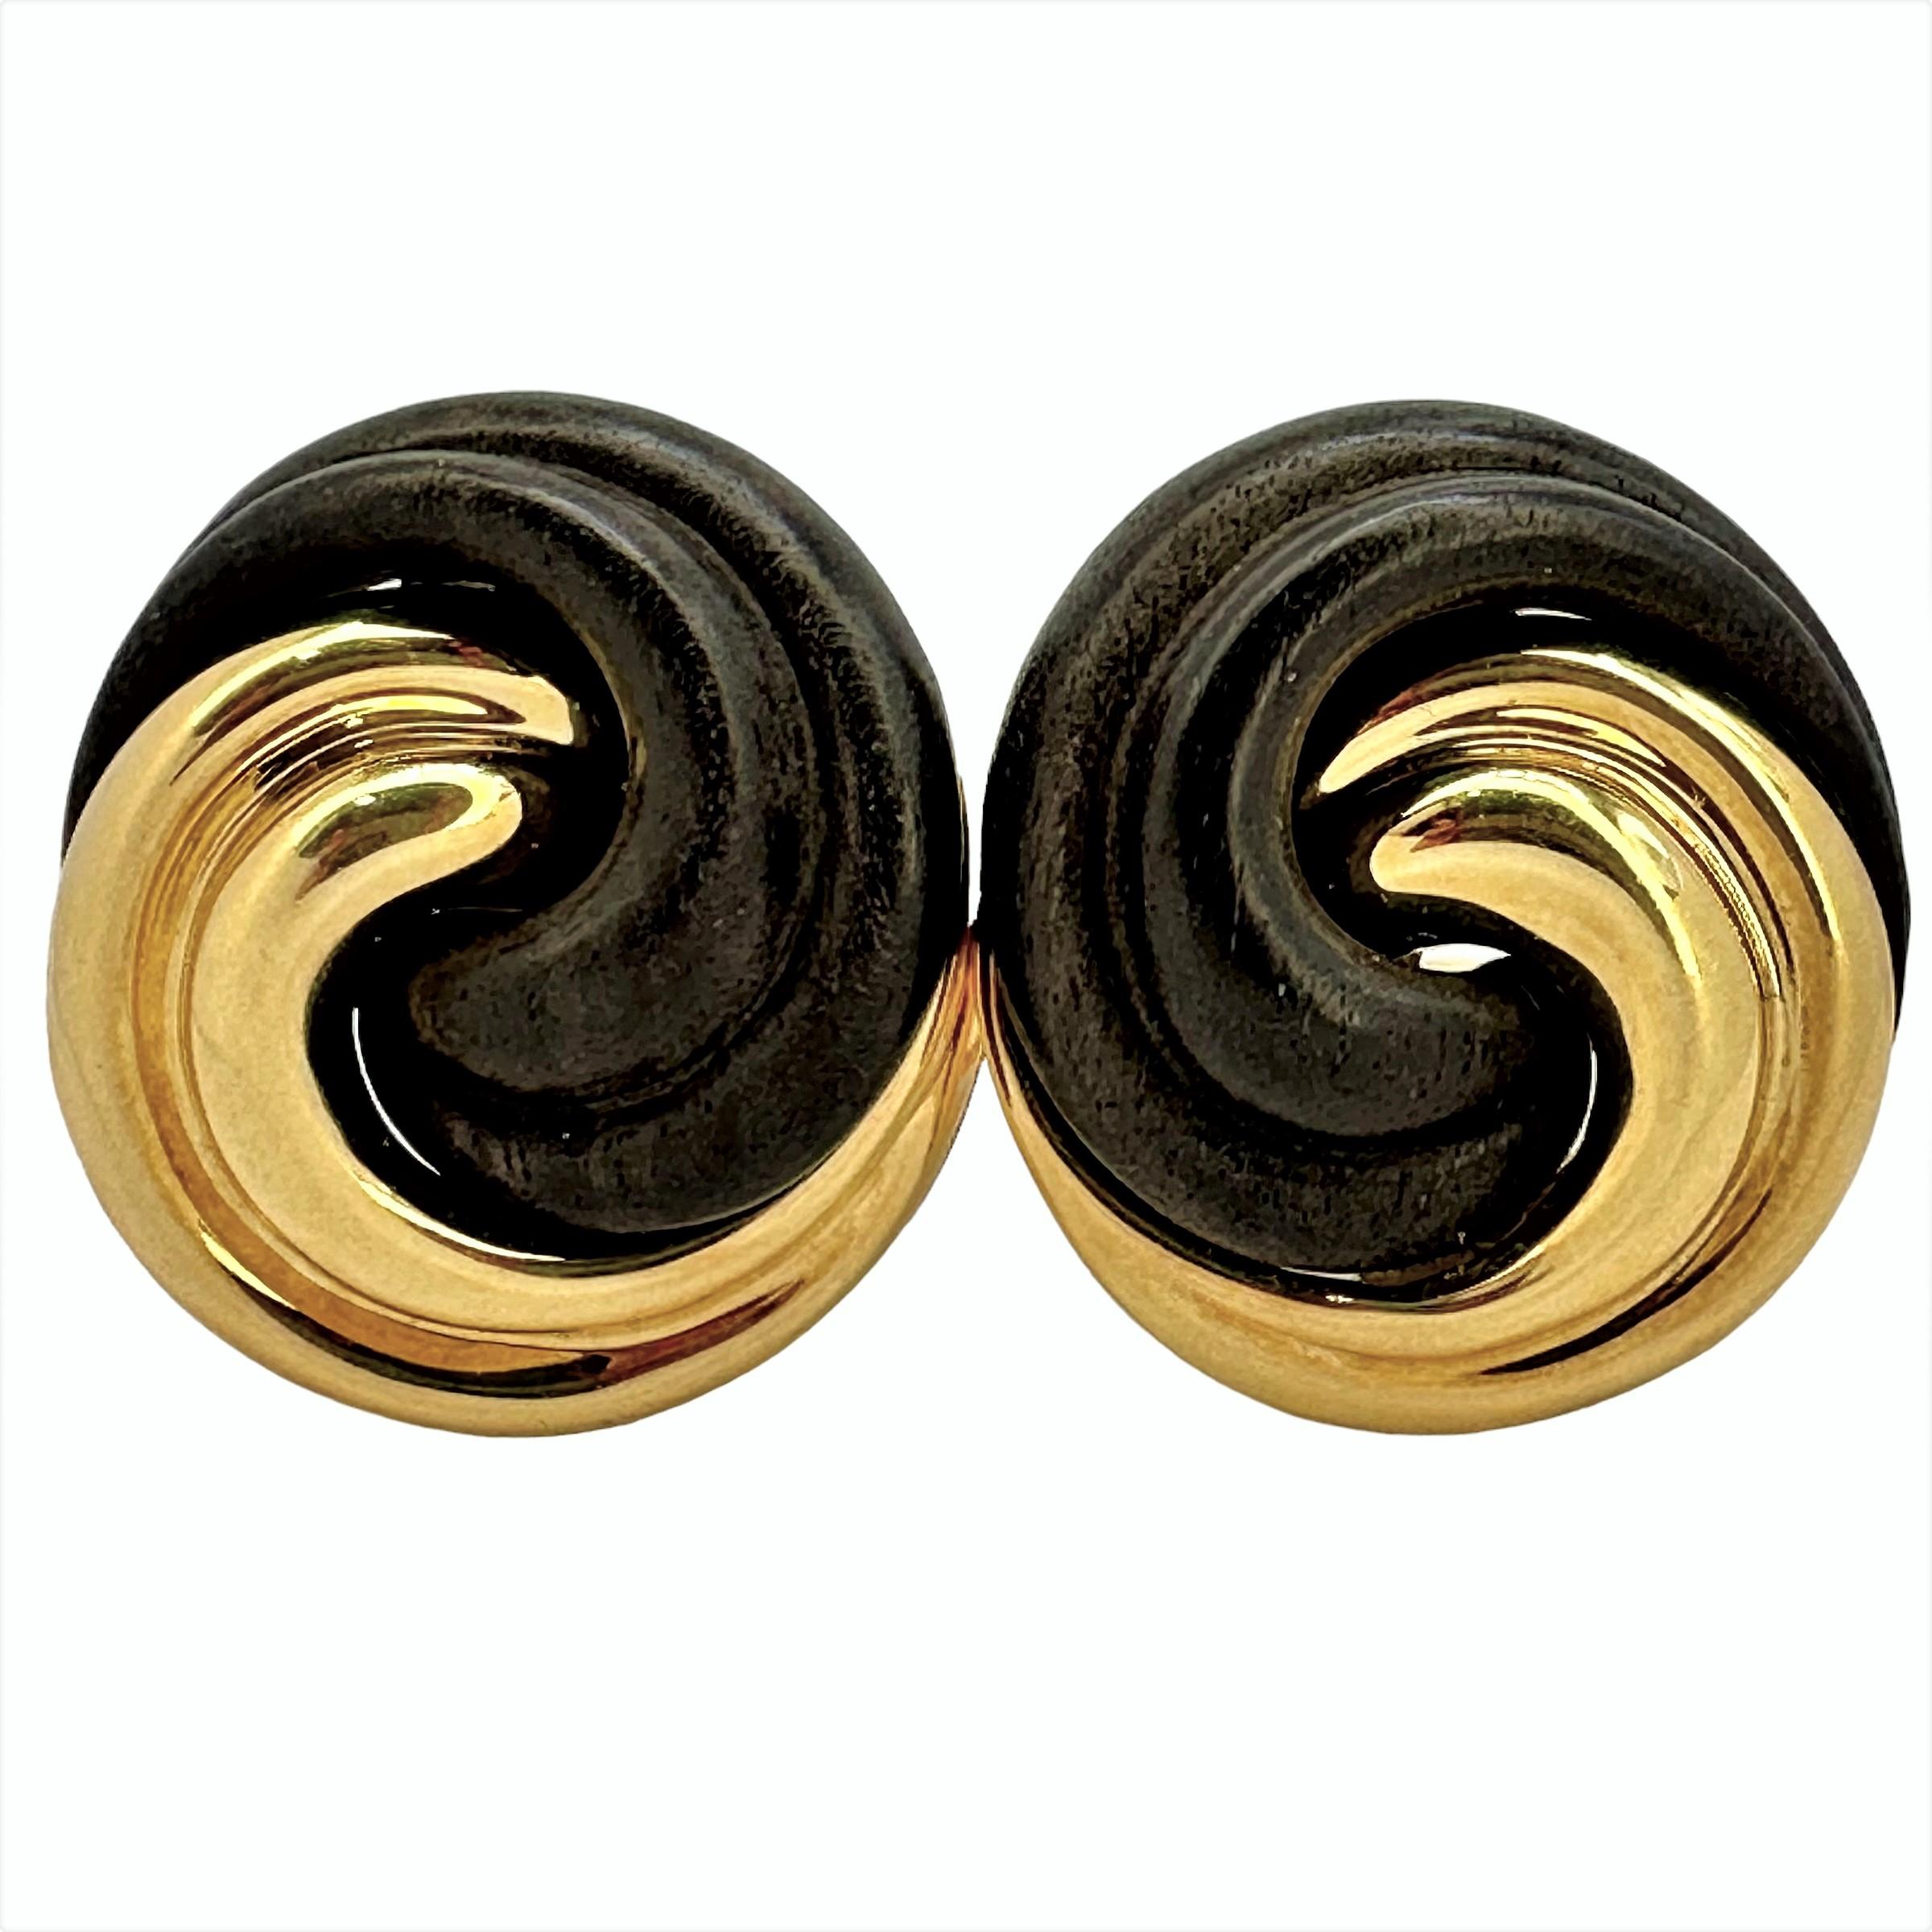 This lovely, tailored and sculptured pair of Seaman Schepps designer earrings are remarkable in their simplicity and impact. Each consists of one fluted 18K yellow gold panel entwined with an opposing fluted rosewood panel.  Length is 1 1/16 inch